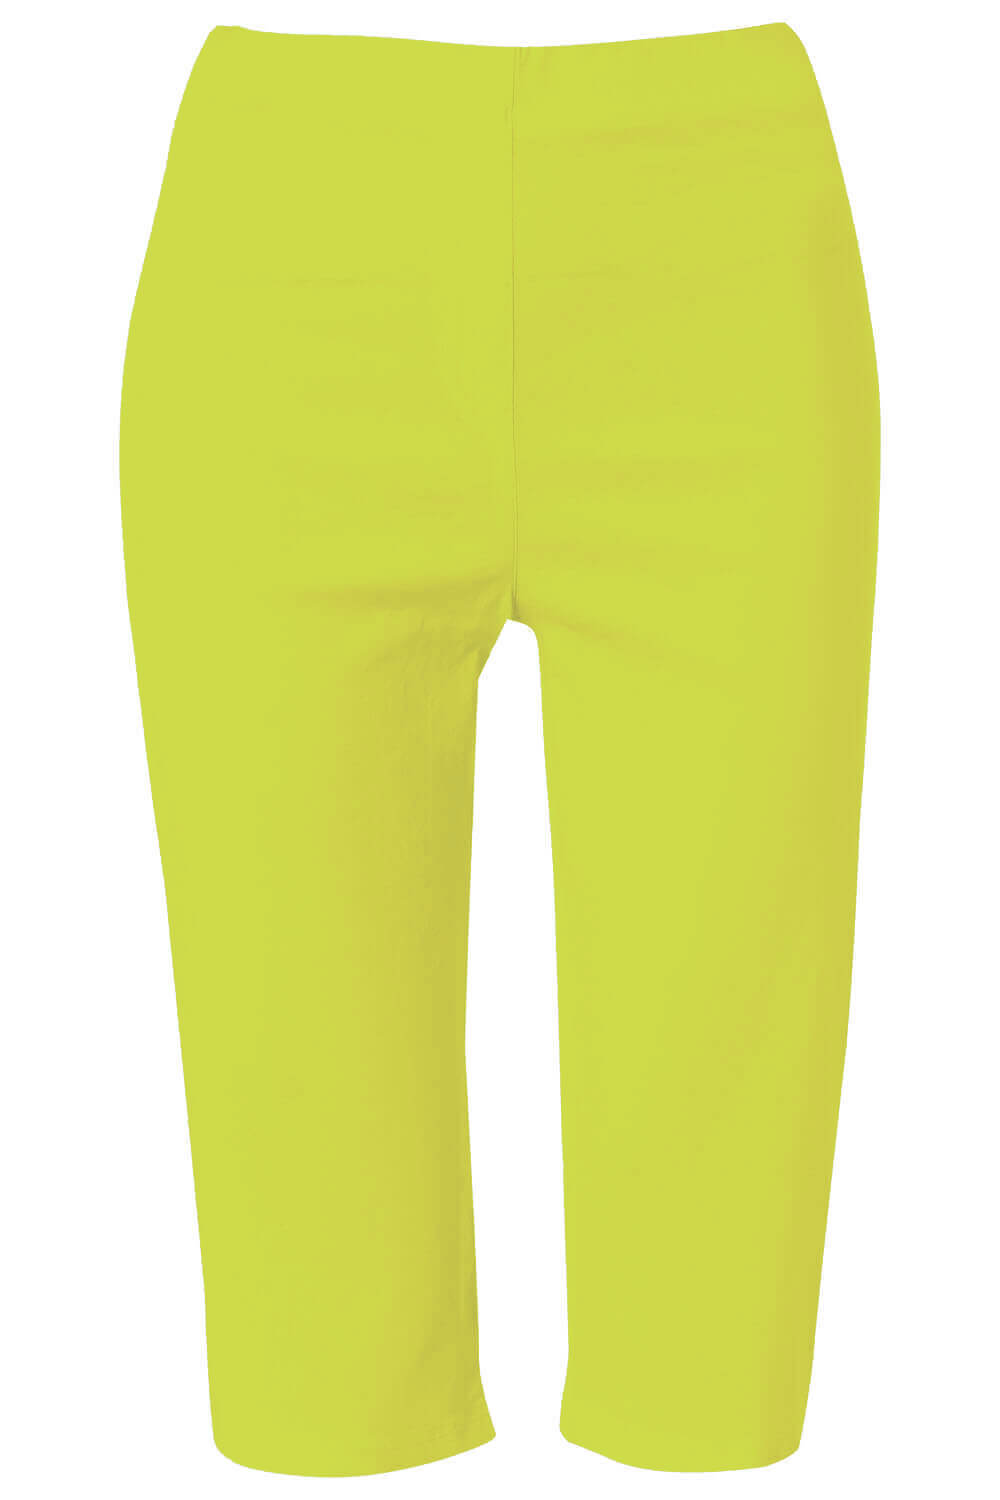 Lime Stretch Knee Length Shorts, Image 6 of 6